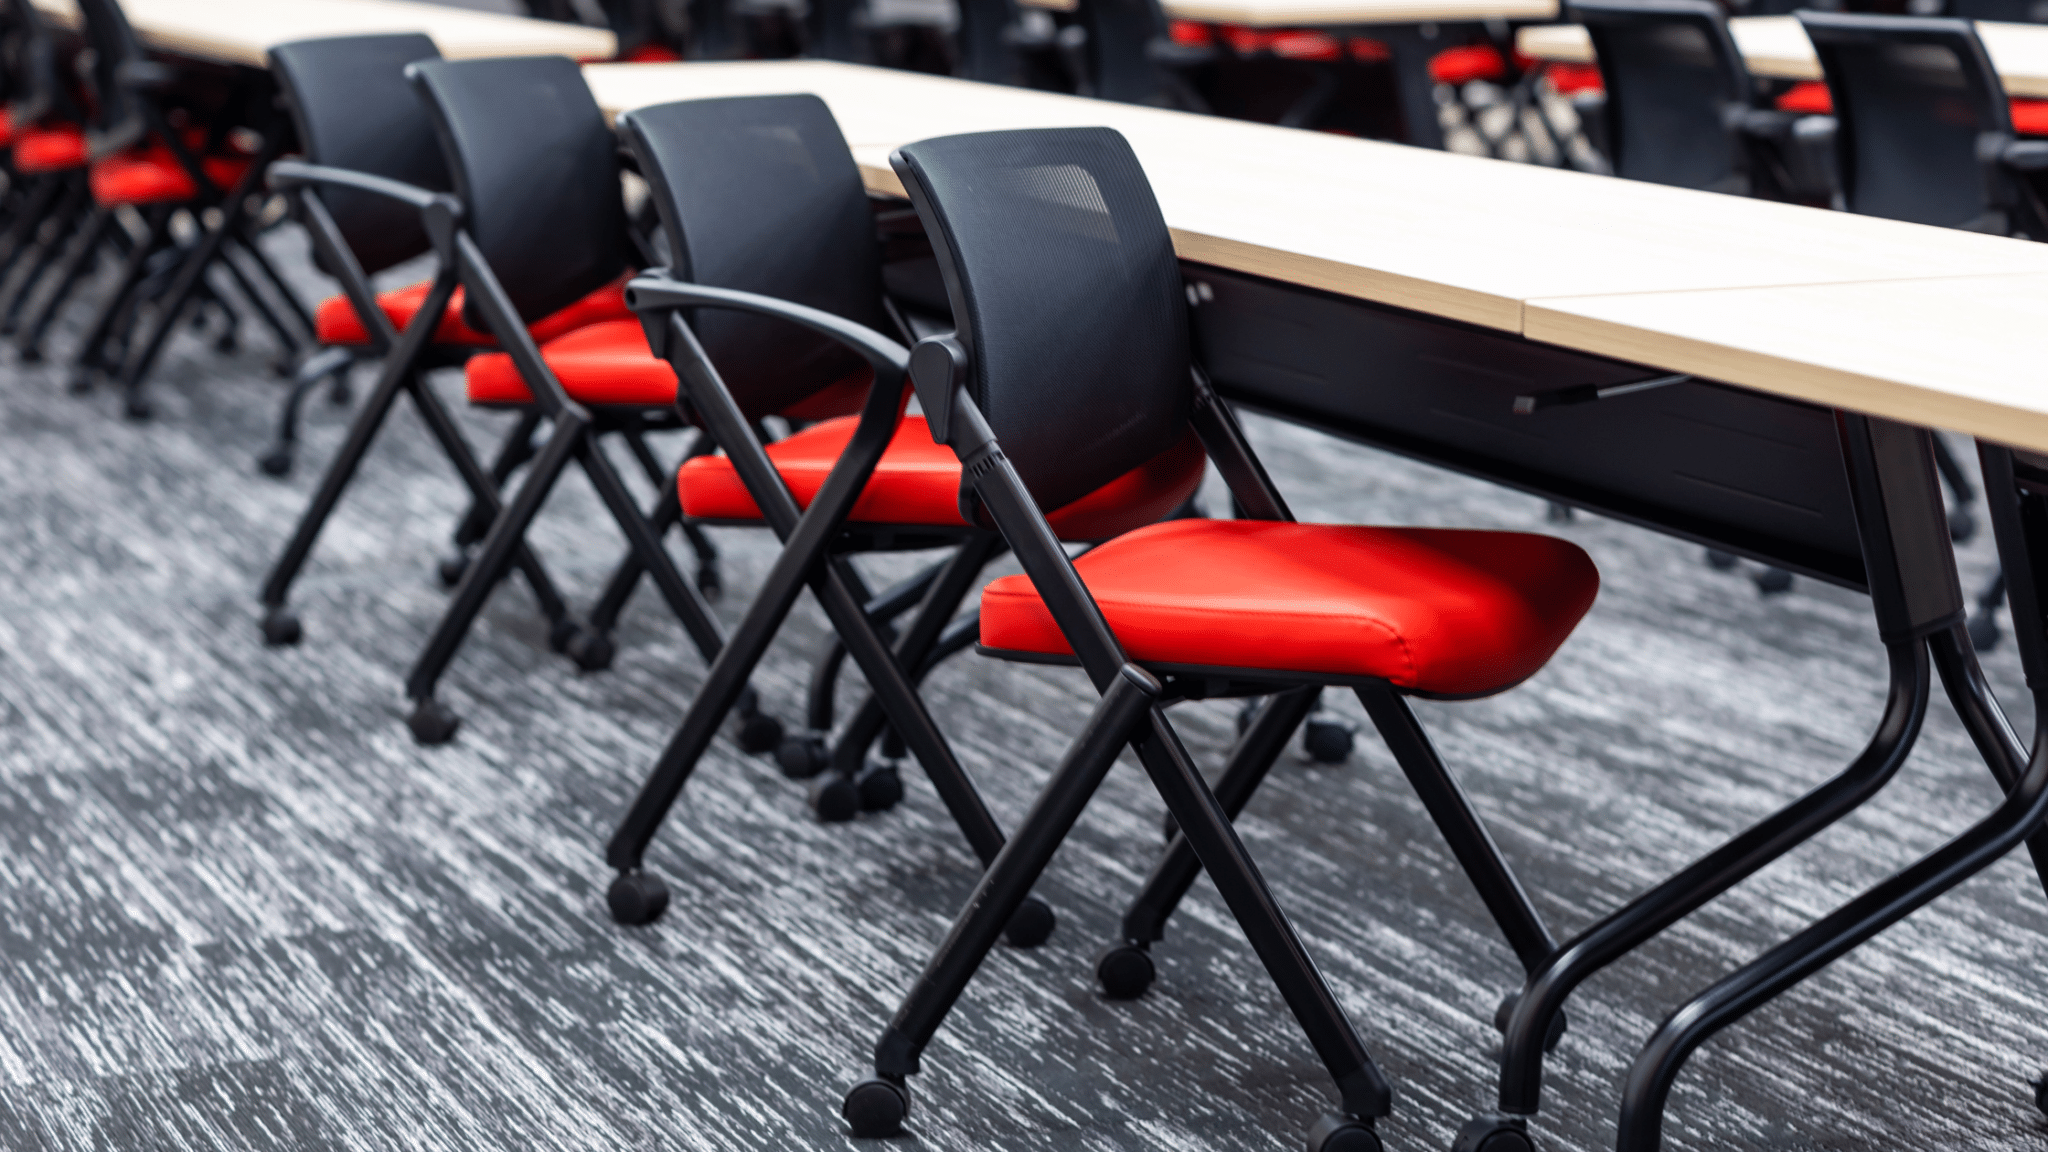 A row of black office chairs with bright red seats are lined up at a table in a modern, contemporary office space.